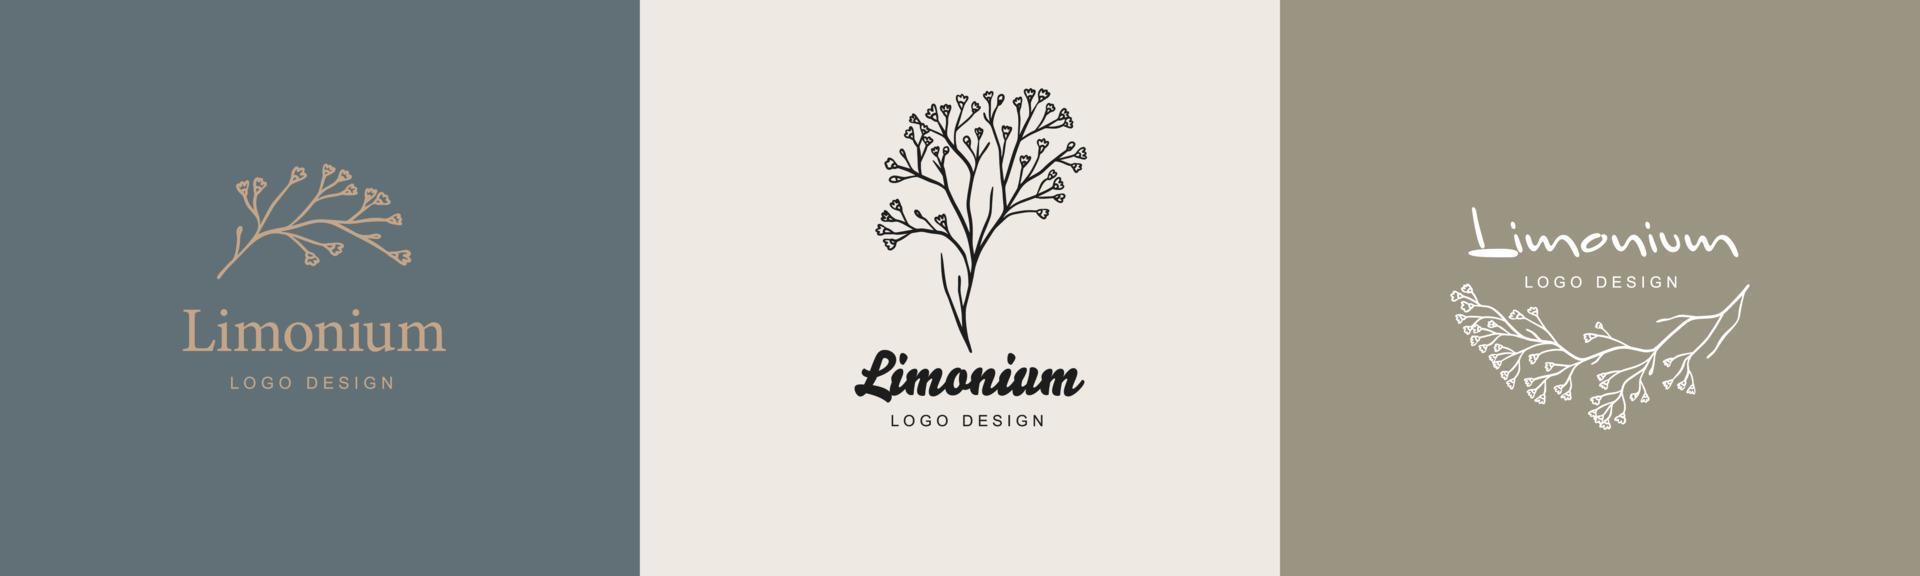 Limonium floral badges and logo. Stamp labels for tag with isolated limonium flower. Hand drawn natural sign for tag product in simple rustic design. Vintage logo branding in template design vector